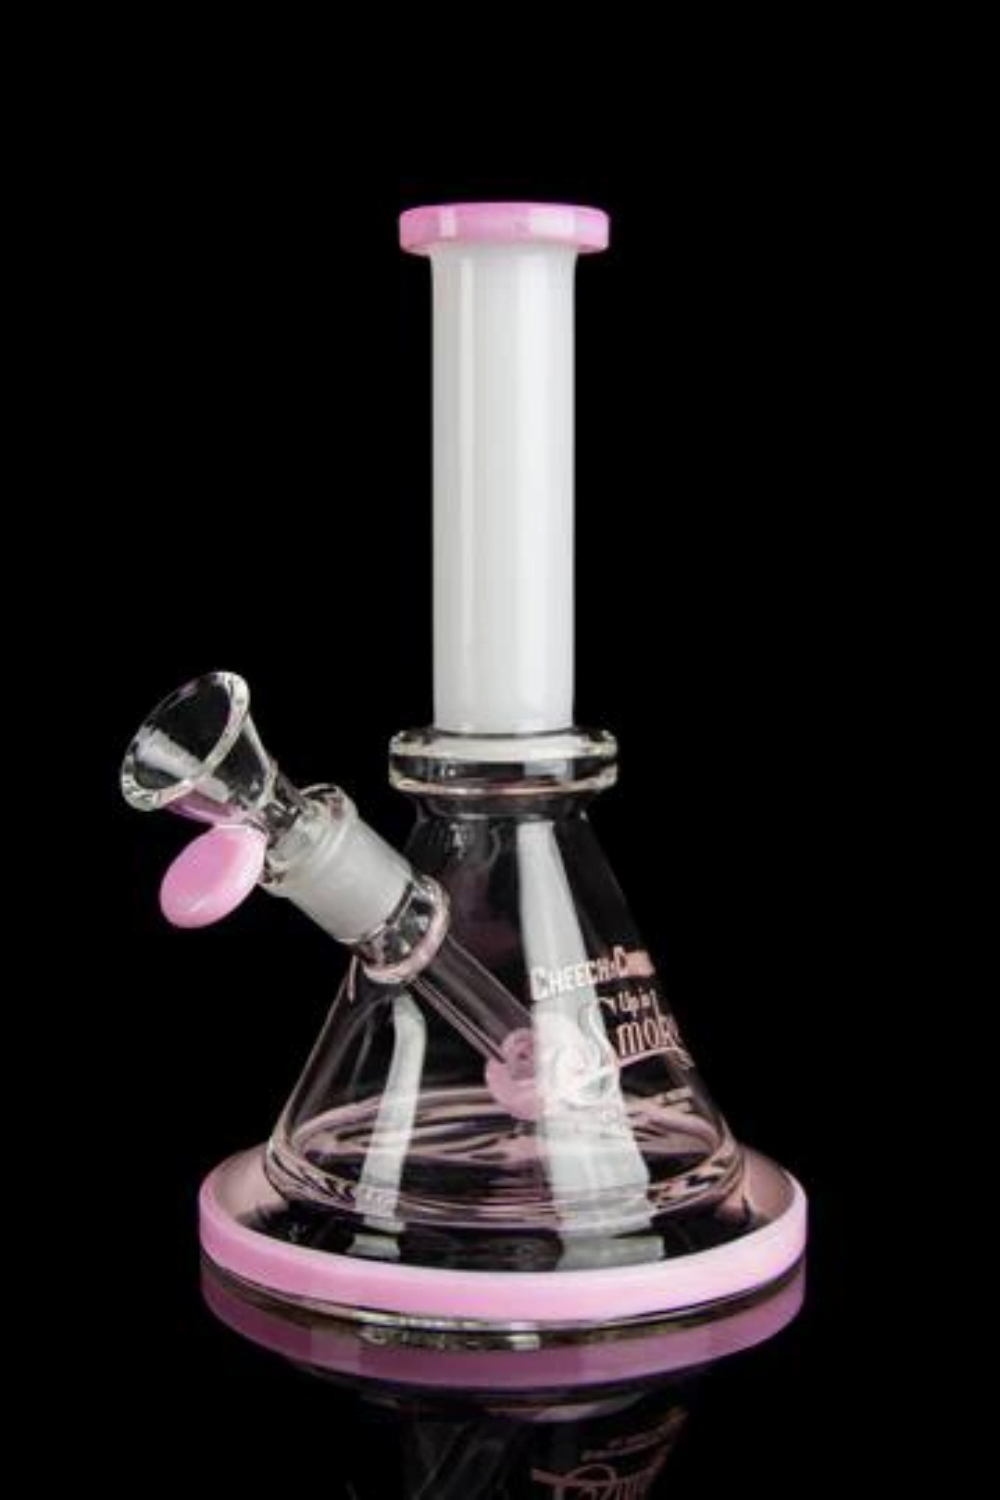 You are currently viewing Cheech & Chong “Pedro” Mini Beaker Bong Pros and Cons